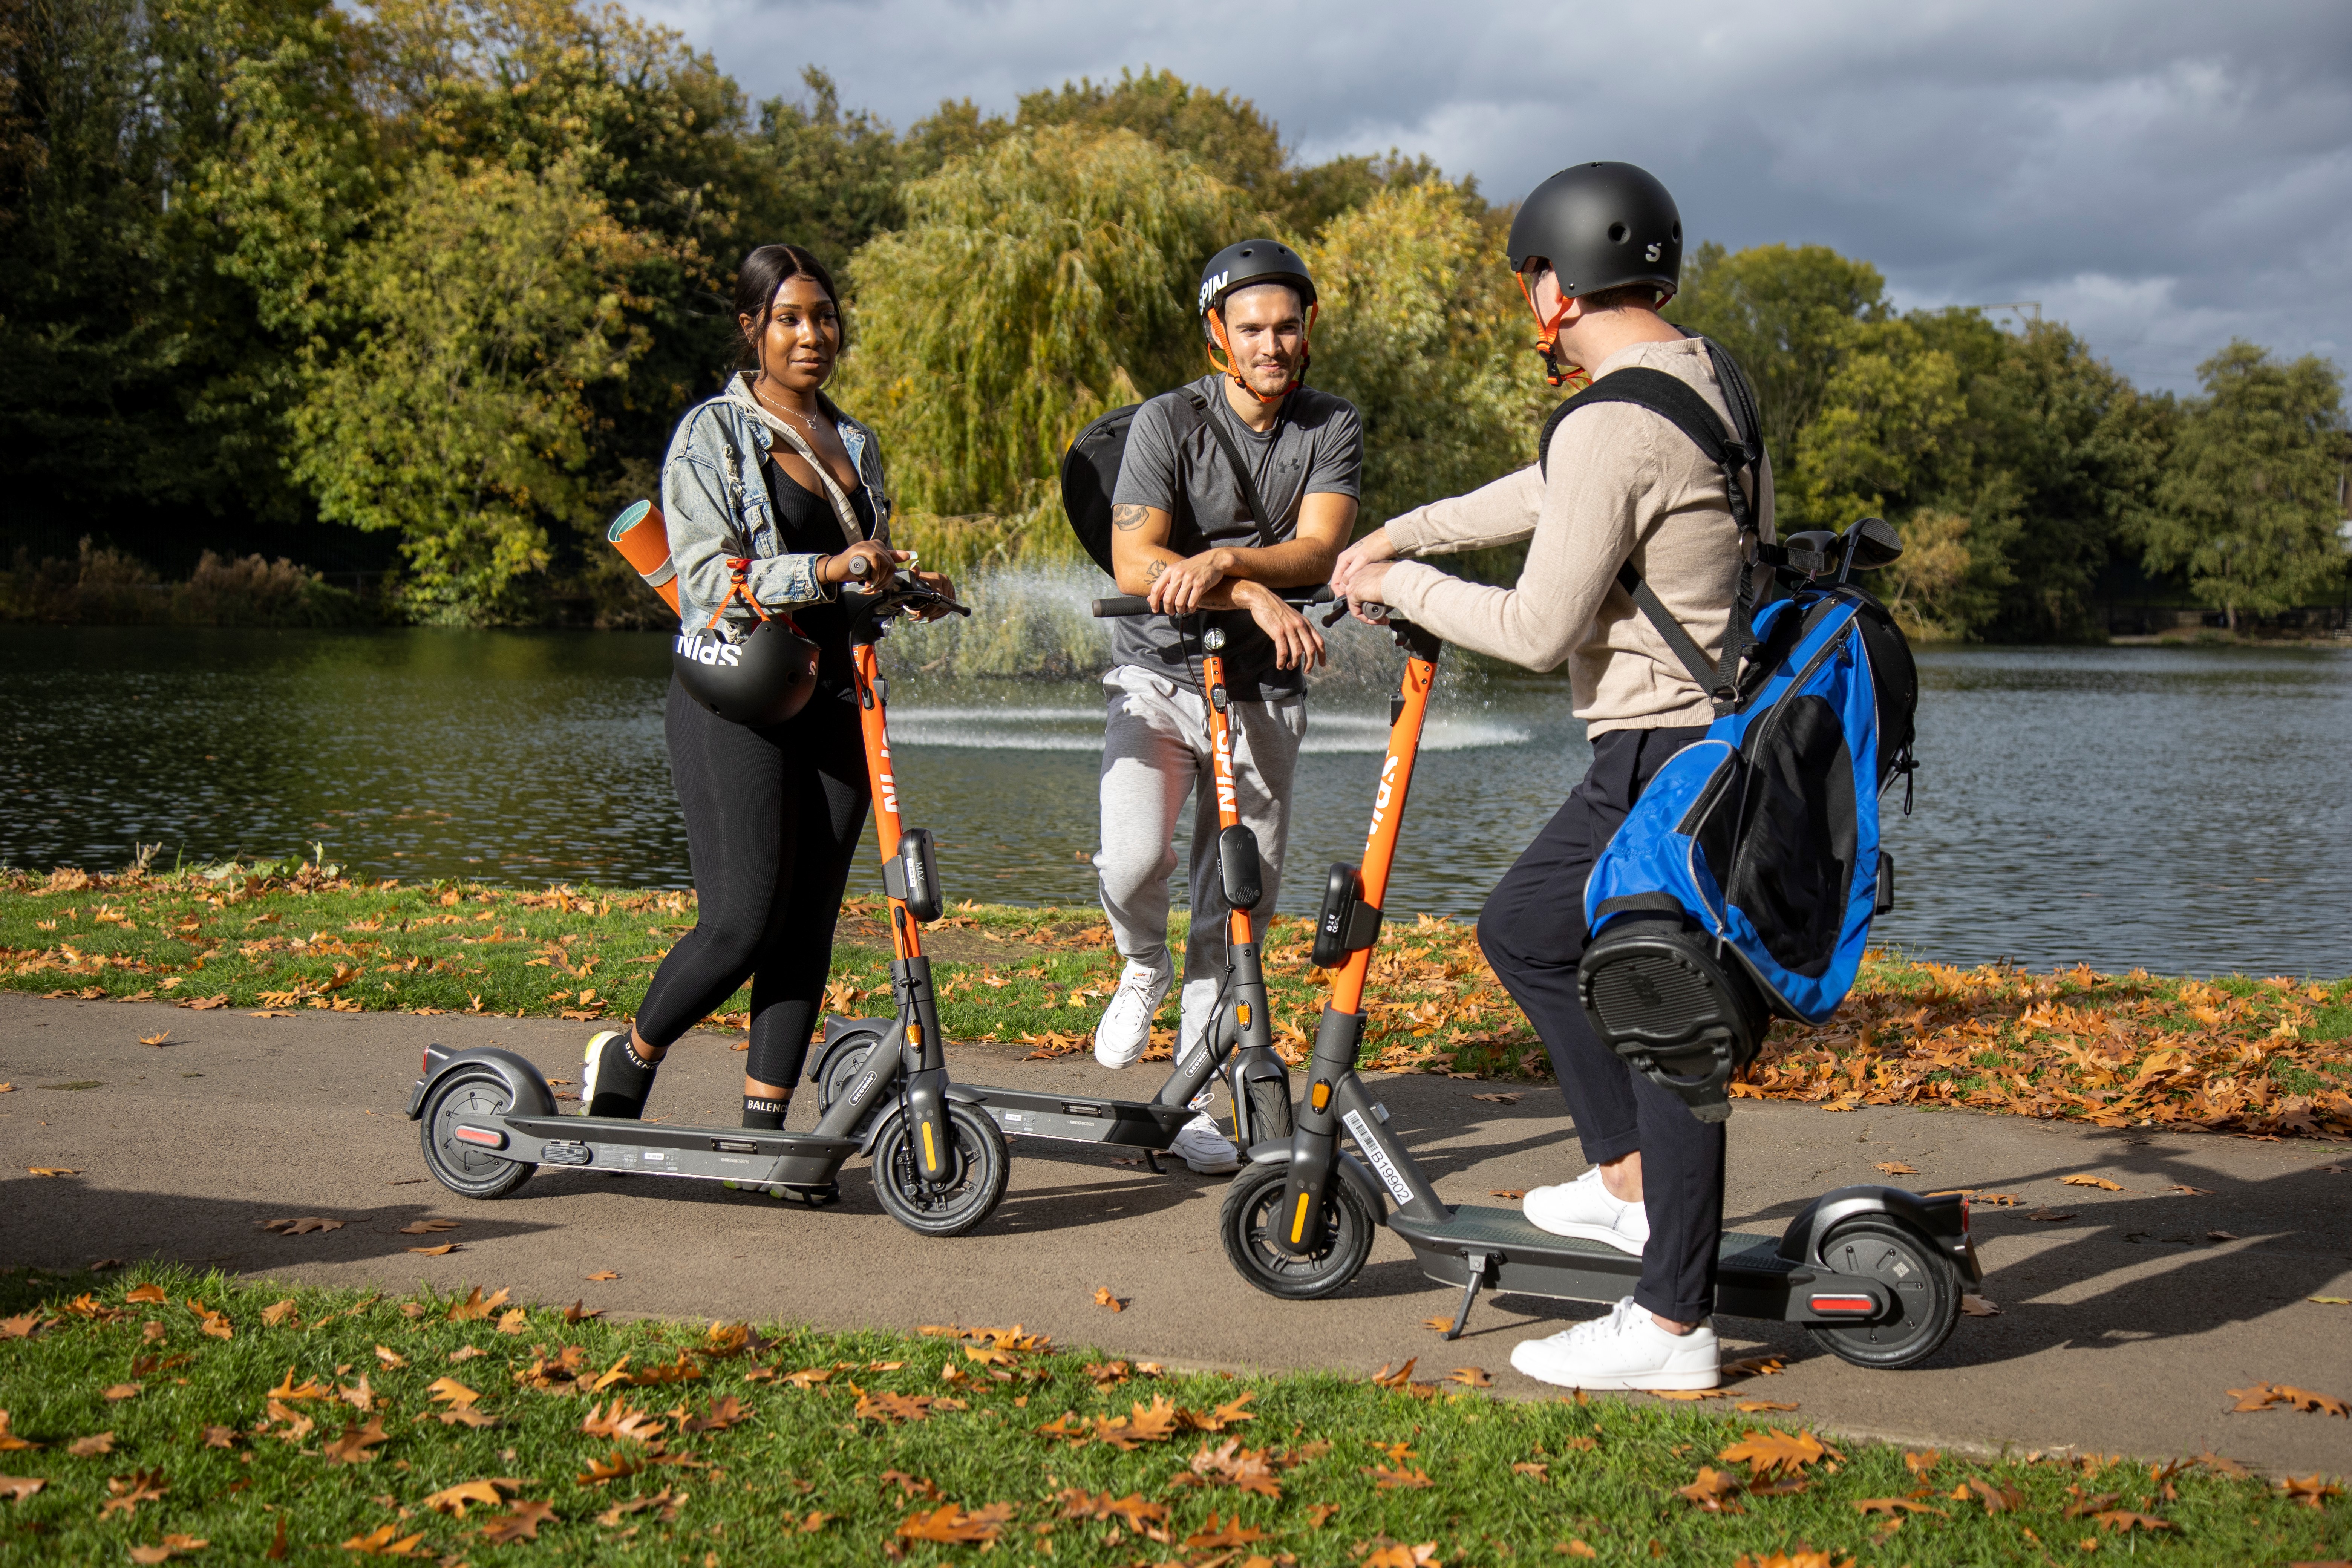 Three people on e-scooters talking on a pathway